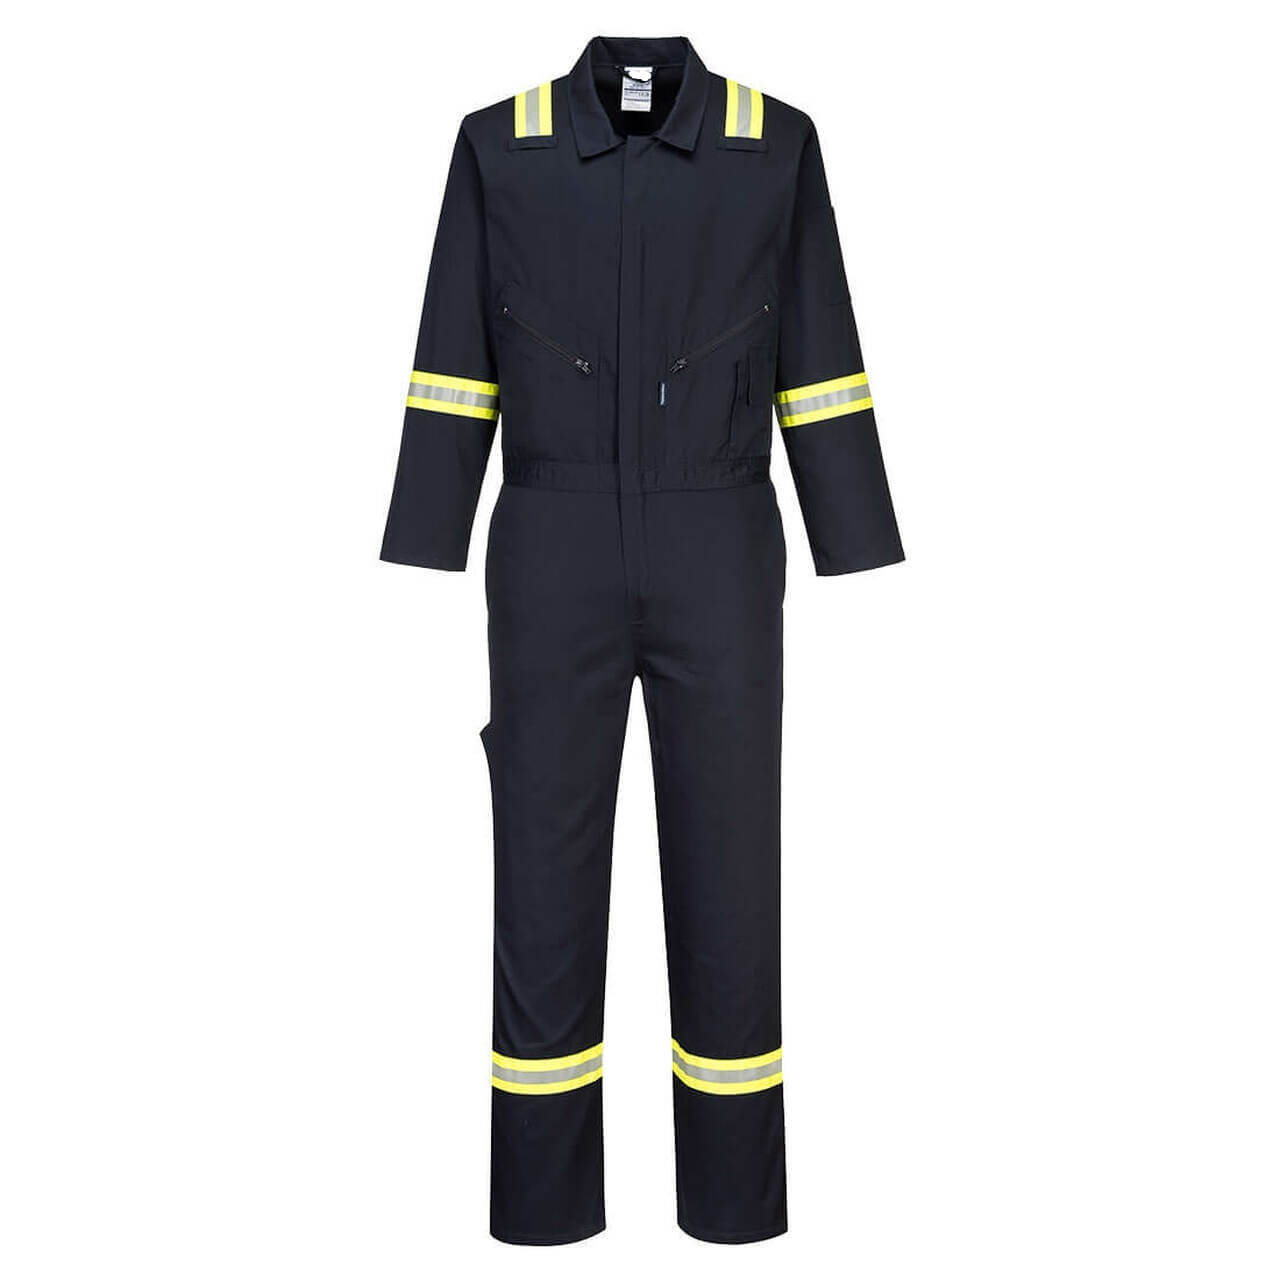 Kingwood Coveralls w/ Contrast Reflective Tape